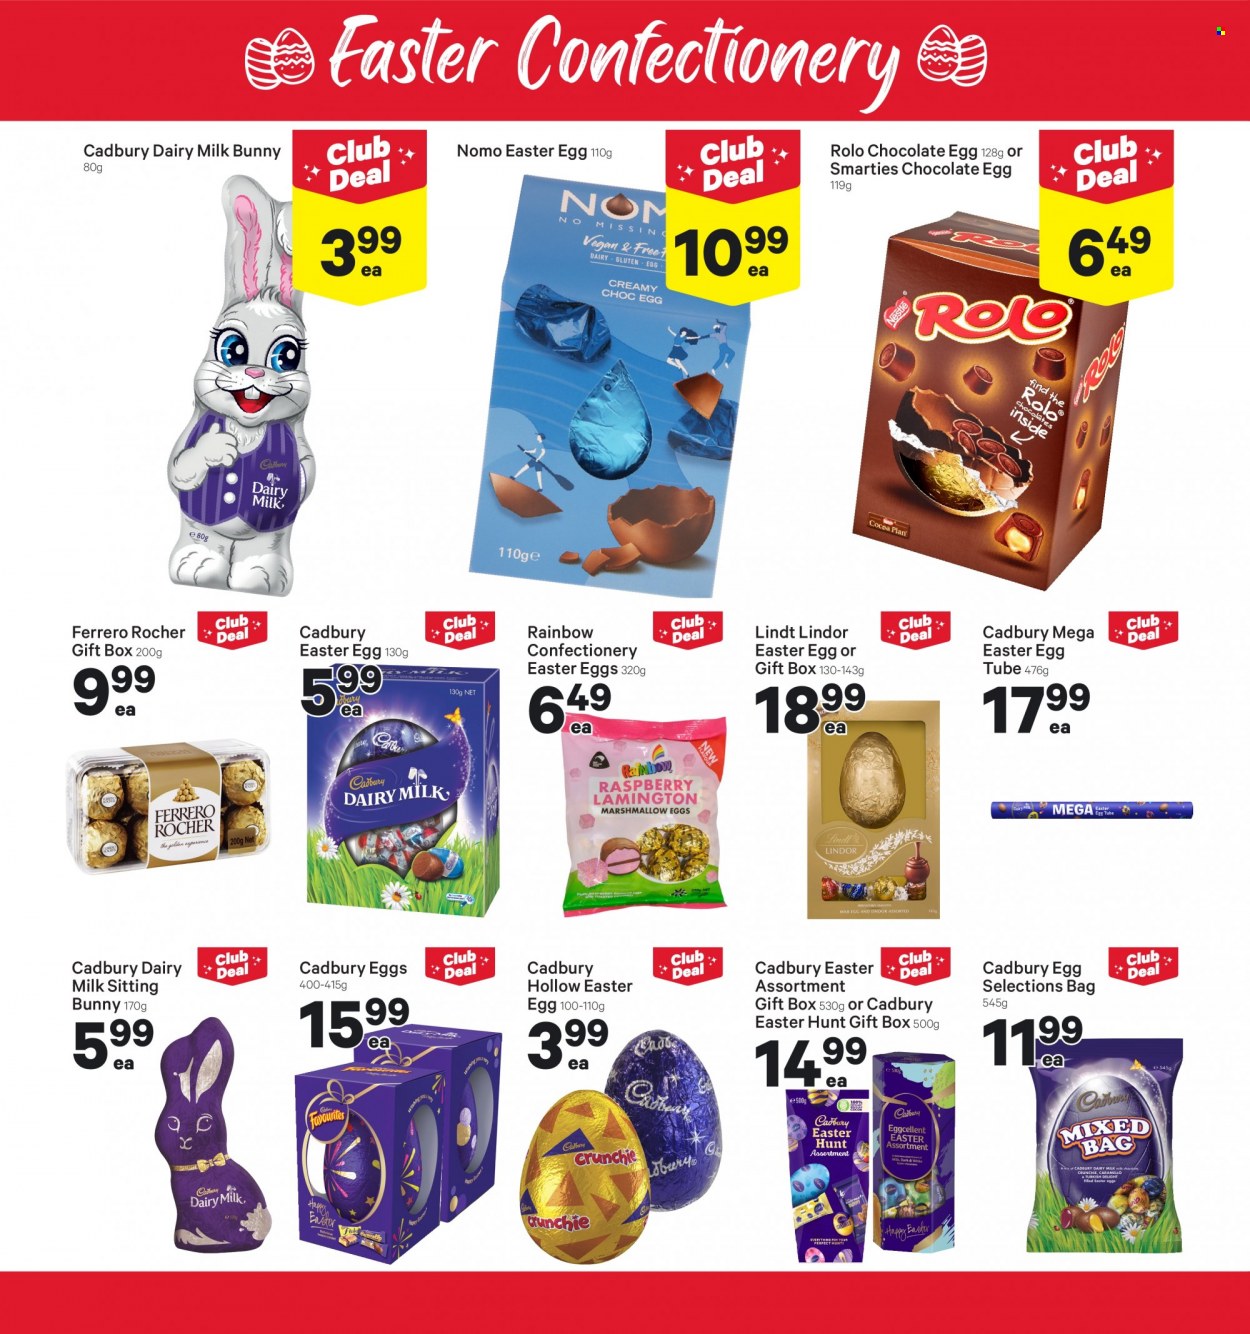 thumbnail - New World mailer - 27.03.2023 - 02.04.2023 - Sales products - egg tube, marshmallows, Nestlé, chocolate, Ferrero Rocher, Lindt, Lindor, easter egg, Smarties, Cadbury, Dairy Milk, chocolate egg, gift box. Page 16.